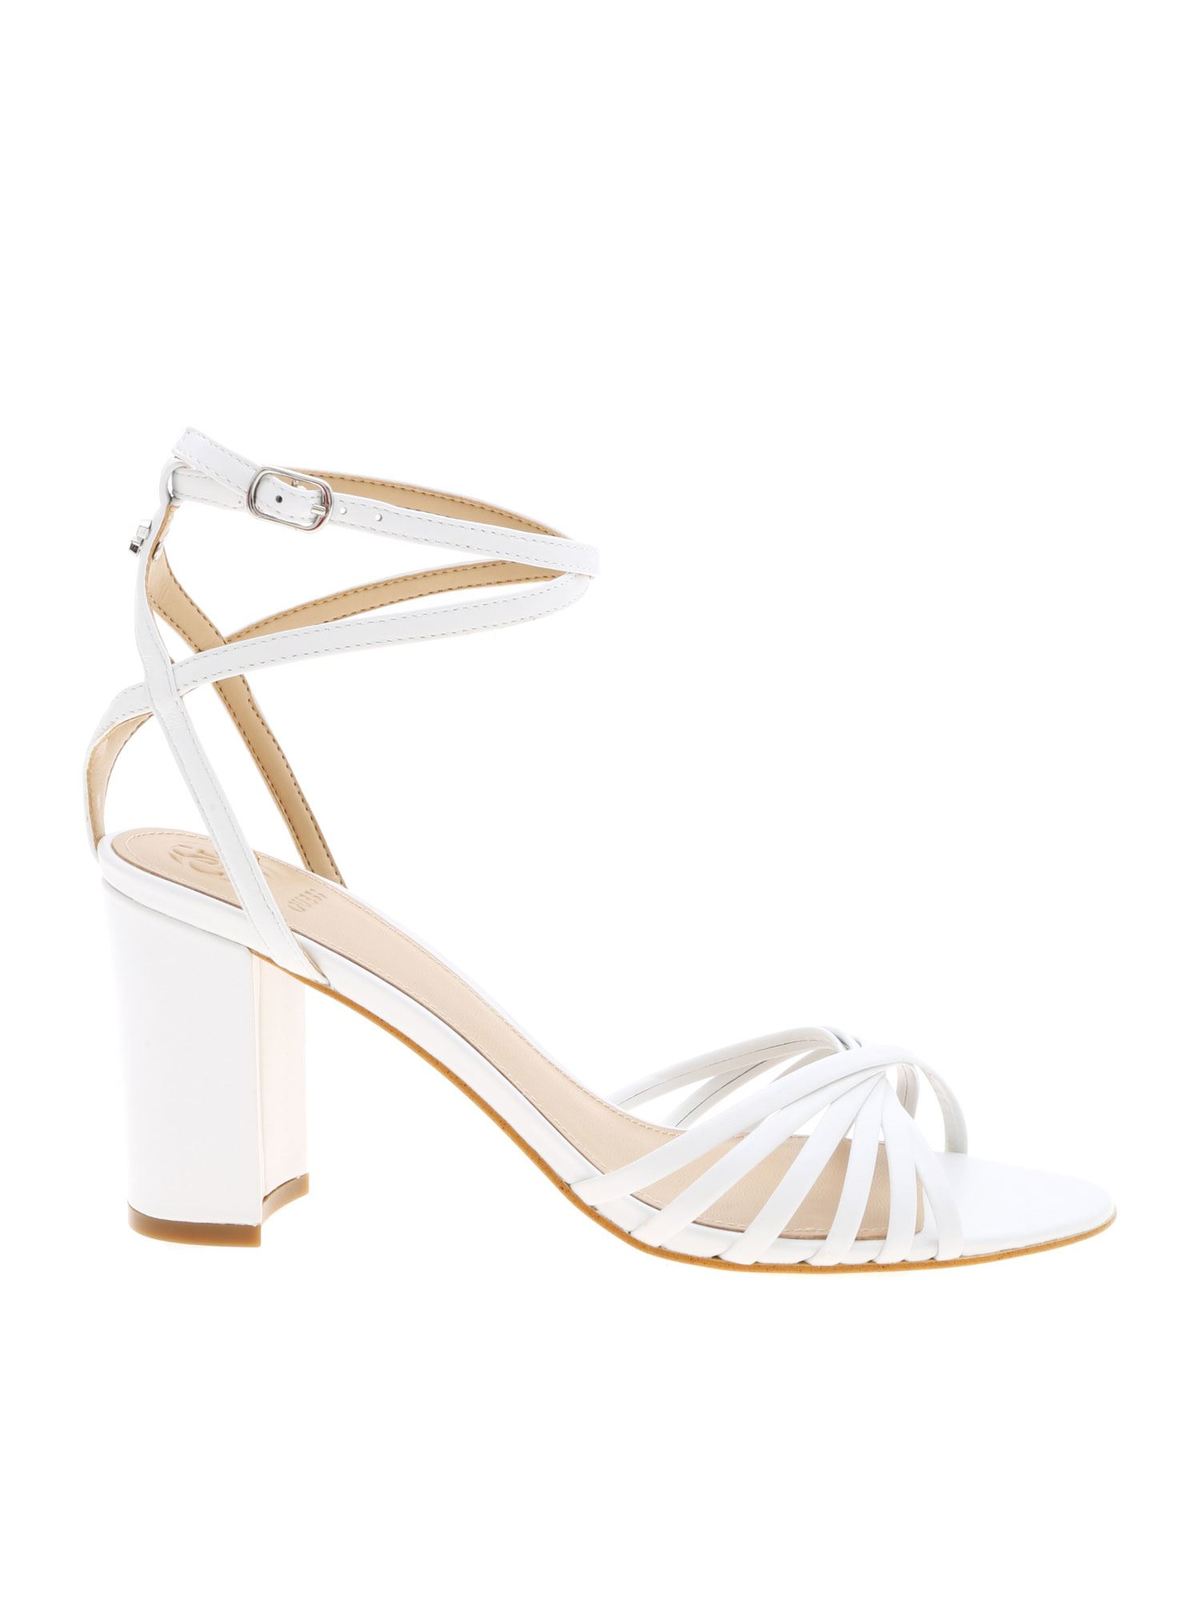 Guess Gabira 13 Heel Sandals White - Buy At Outlet Prices!